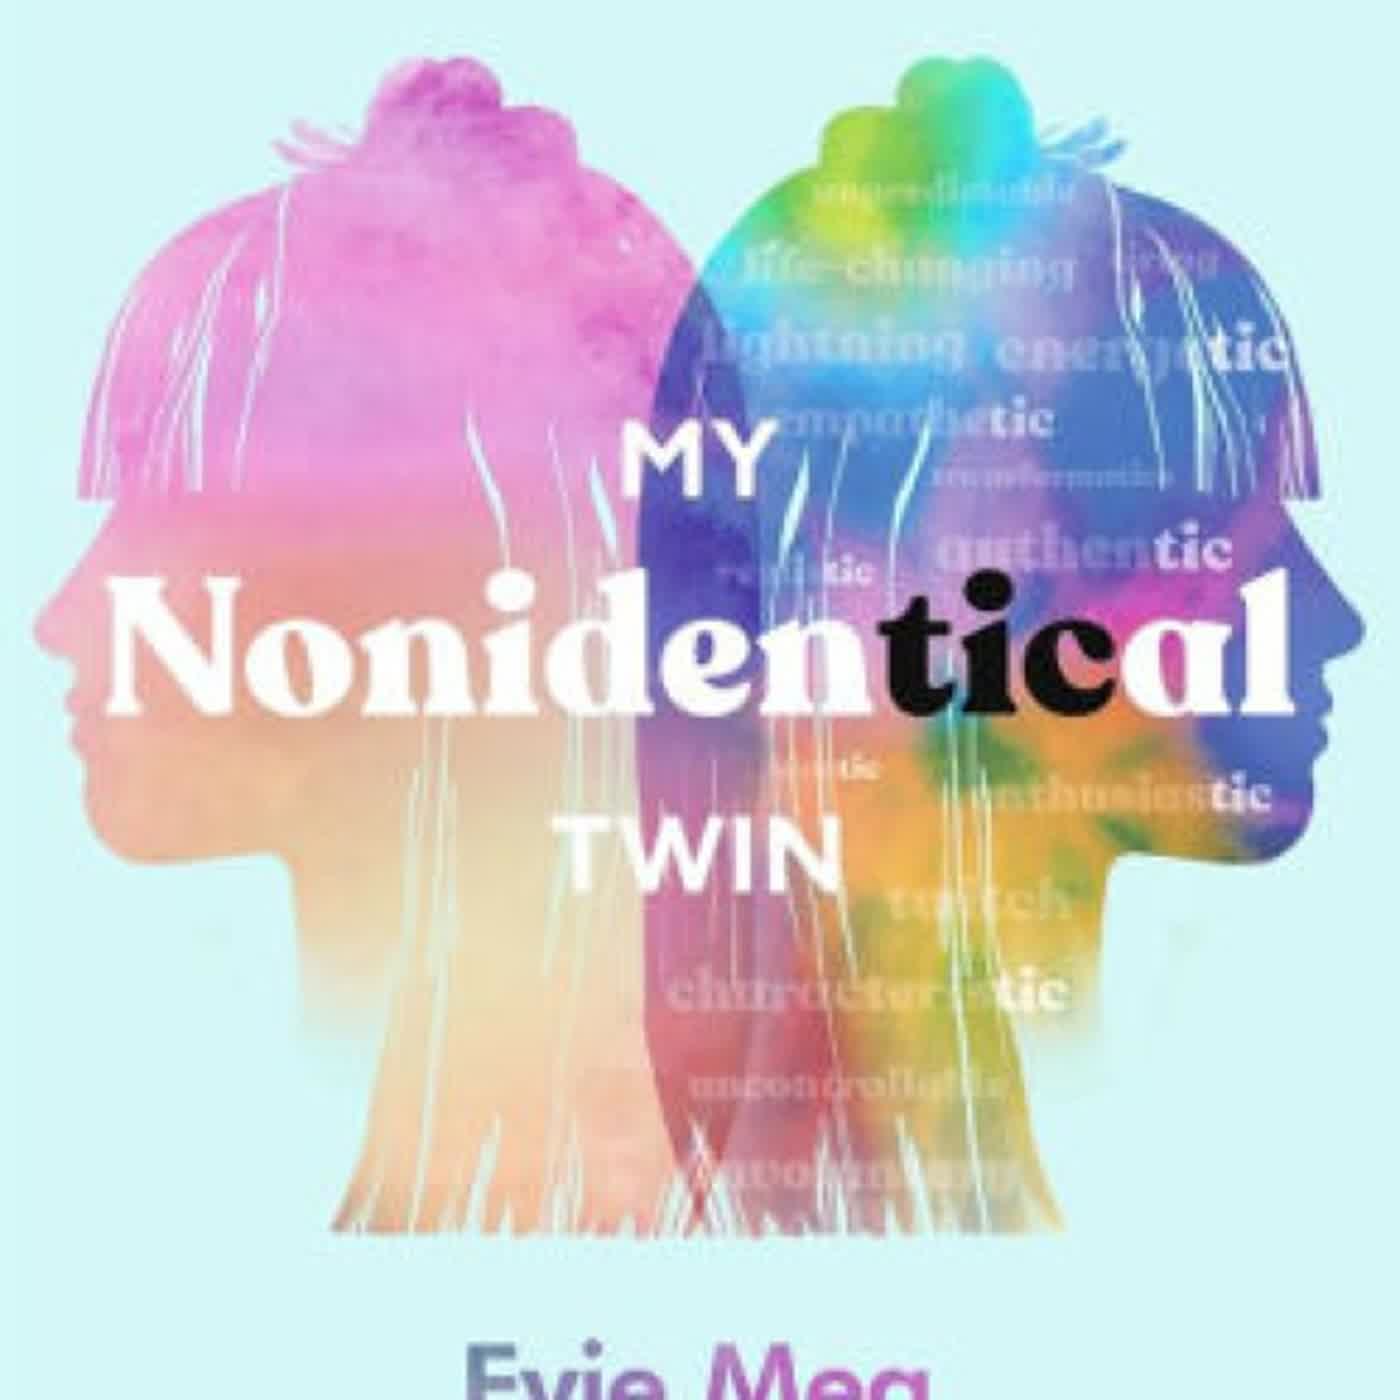 [PDF] My Nonidentical Twin: What I'd like you to know about living with Tourette's by Evie Meg - This Trippy Hippie